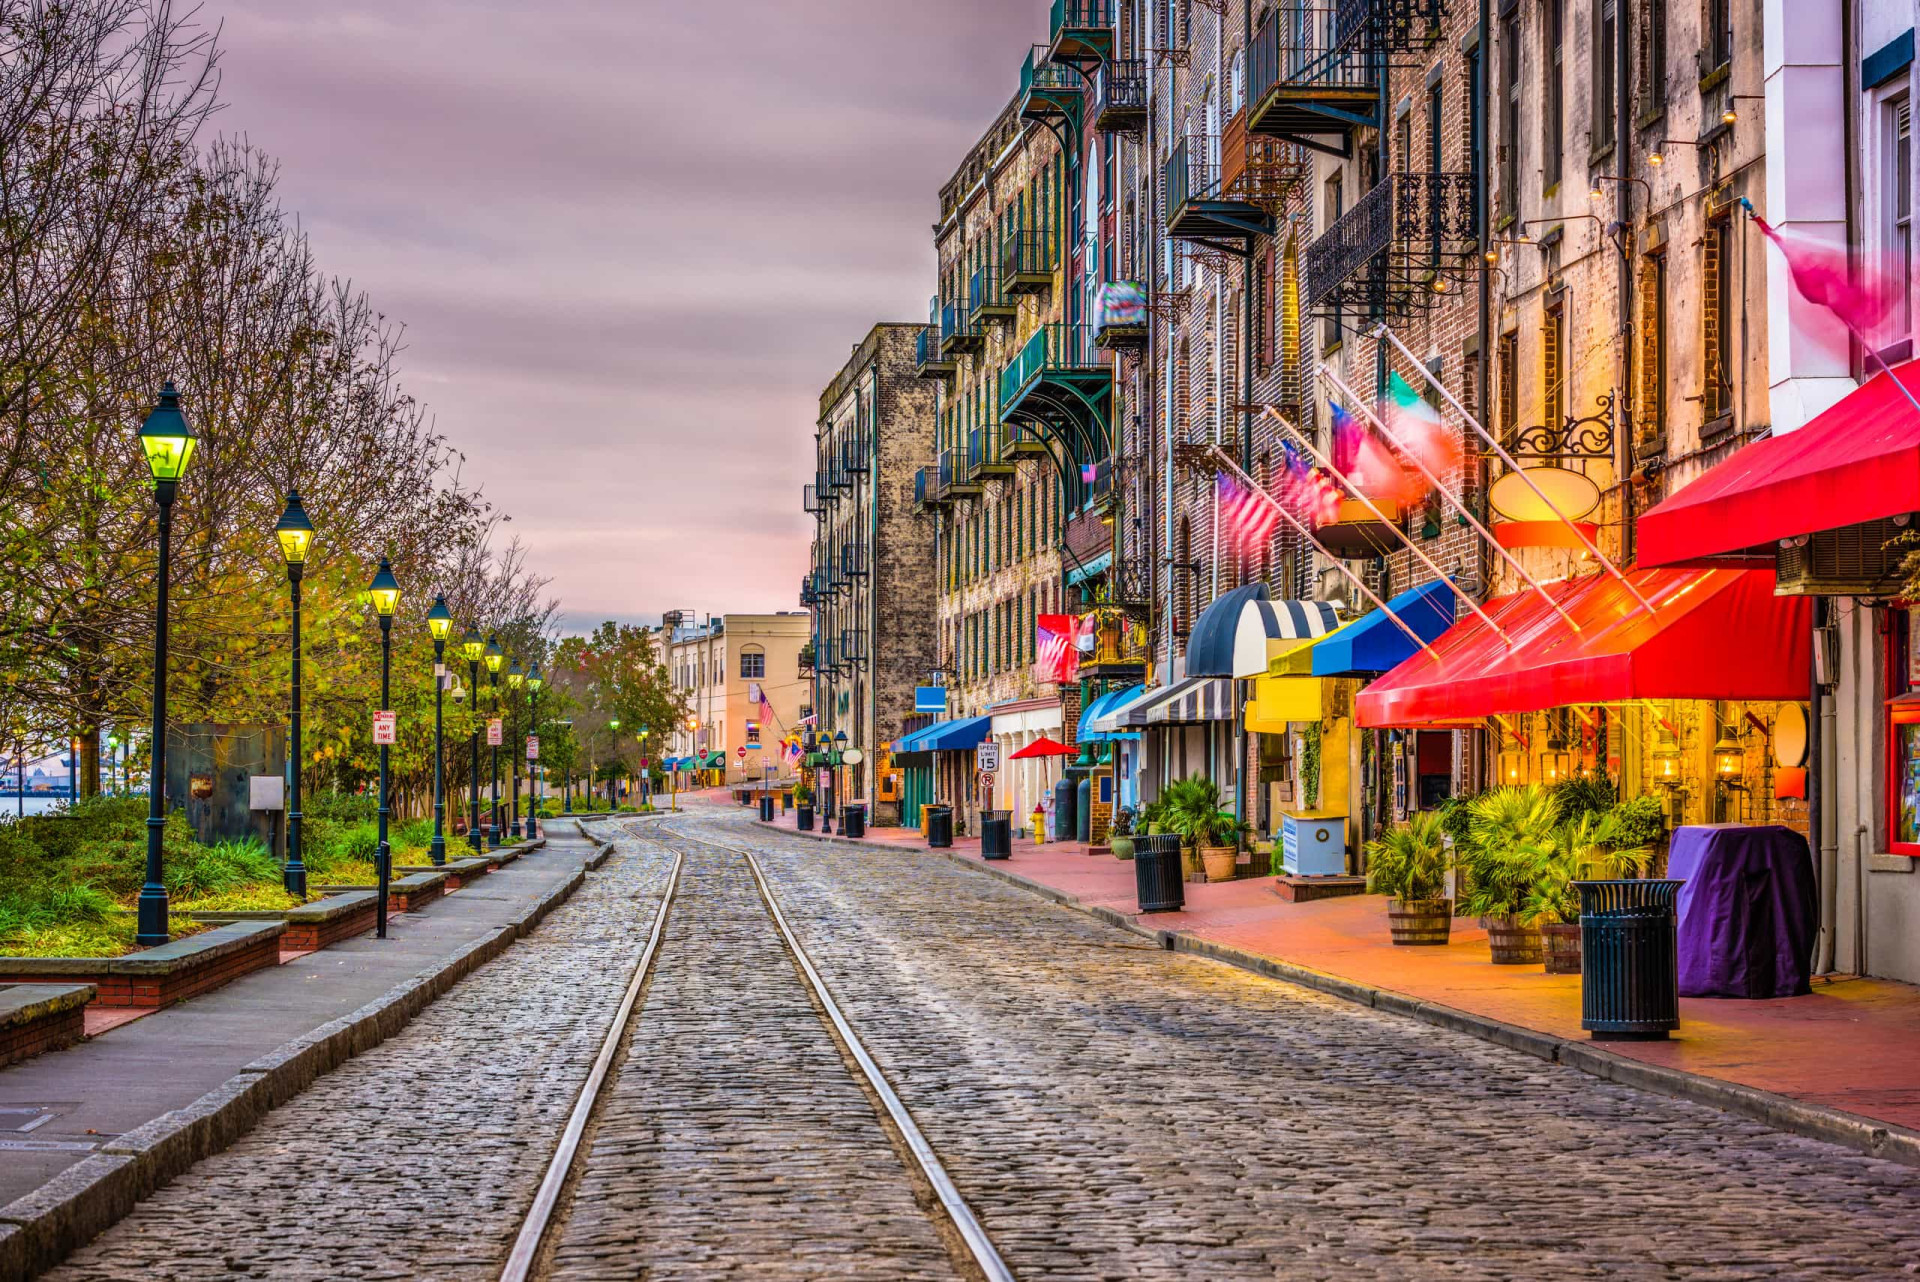 <p>Visitors to Savannah could easily spend an entire day simply exploring the many enticing establishments on River Street. On the banks of the Savannah River, chic boutiques sit shoulder to shoulder with bars and restaurants, and there are a number of historical monuments to admire.</p><p>You may also like:<a href="https://www.starsinsider.com/n/279042?utm_source=msn.com&utm_medium=display&utm_campaign=referral_description&utm_content=487017v3en-us"> How smart is your dog? This breed intelligence ranking will tell</a></p>